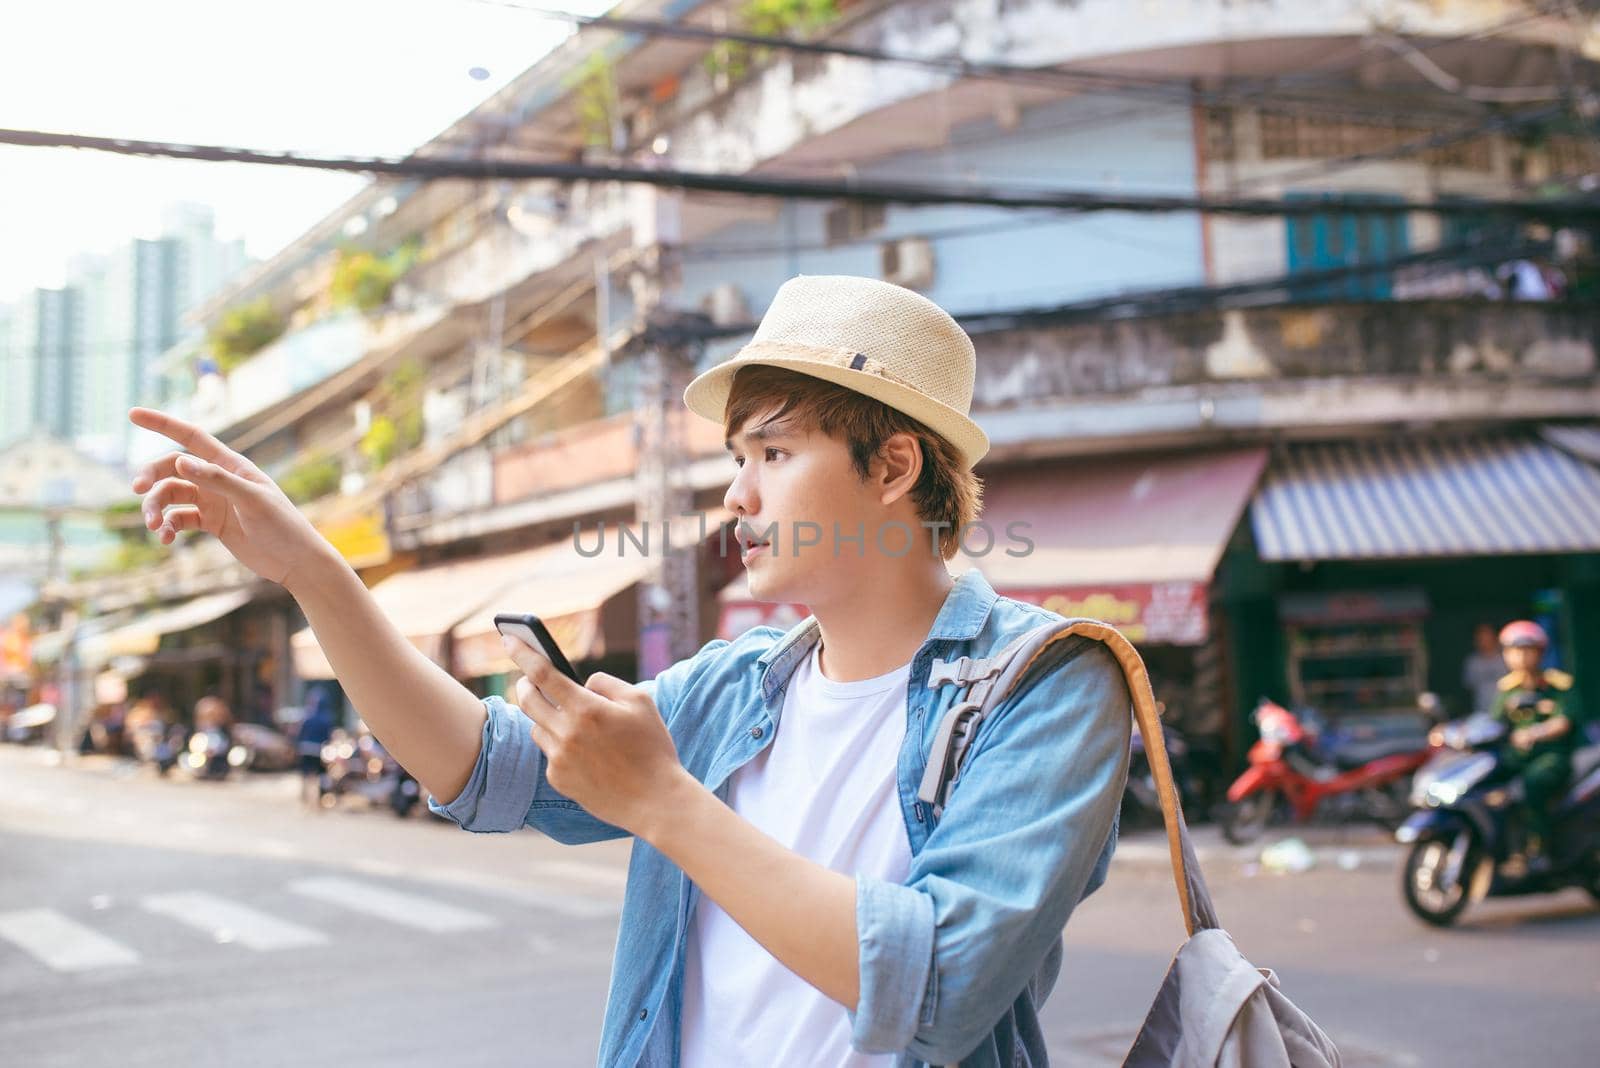 Tourism and technology. Concept of online map. Traveling backpacker young man using digital tablet outdoor.